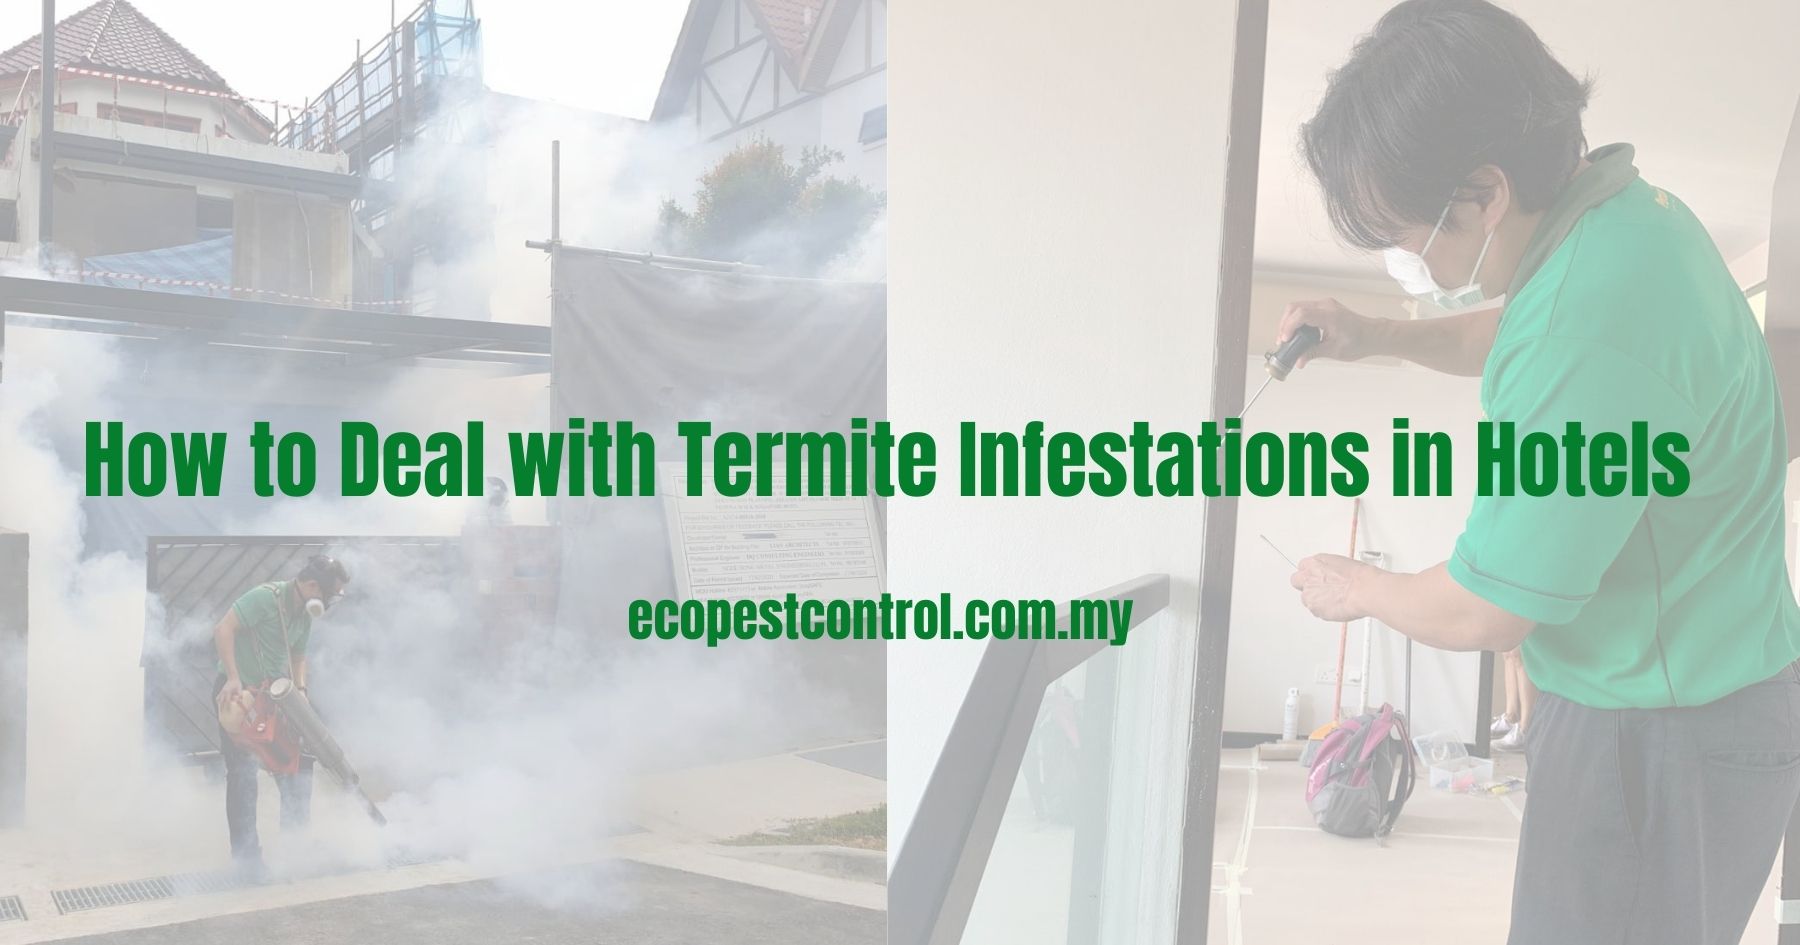 How to Deal with Termite Infestations in Hotels